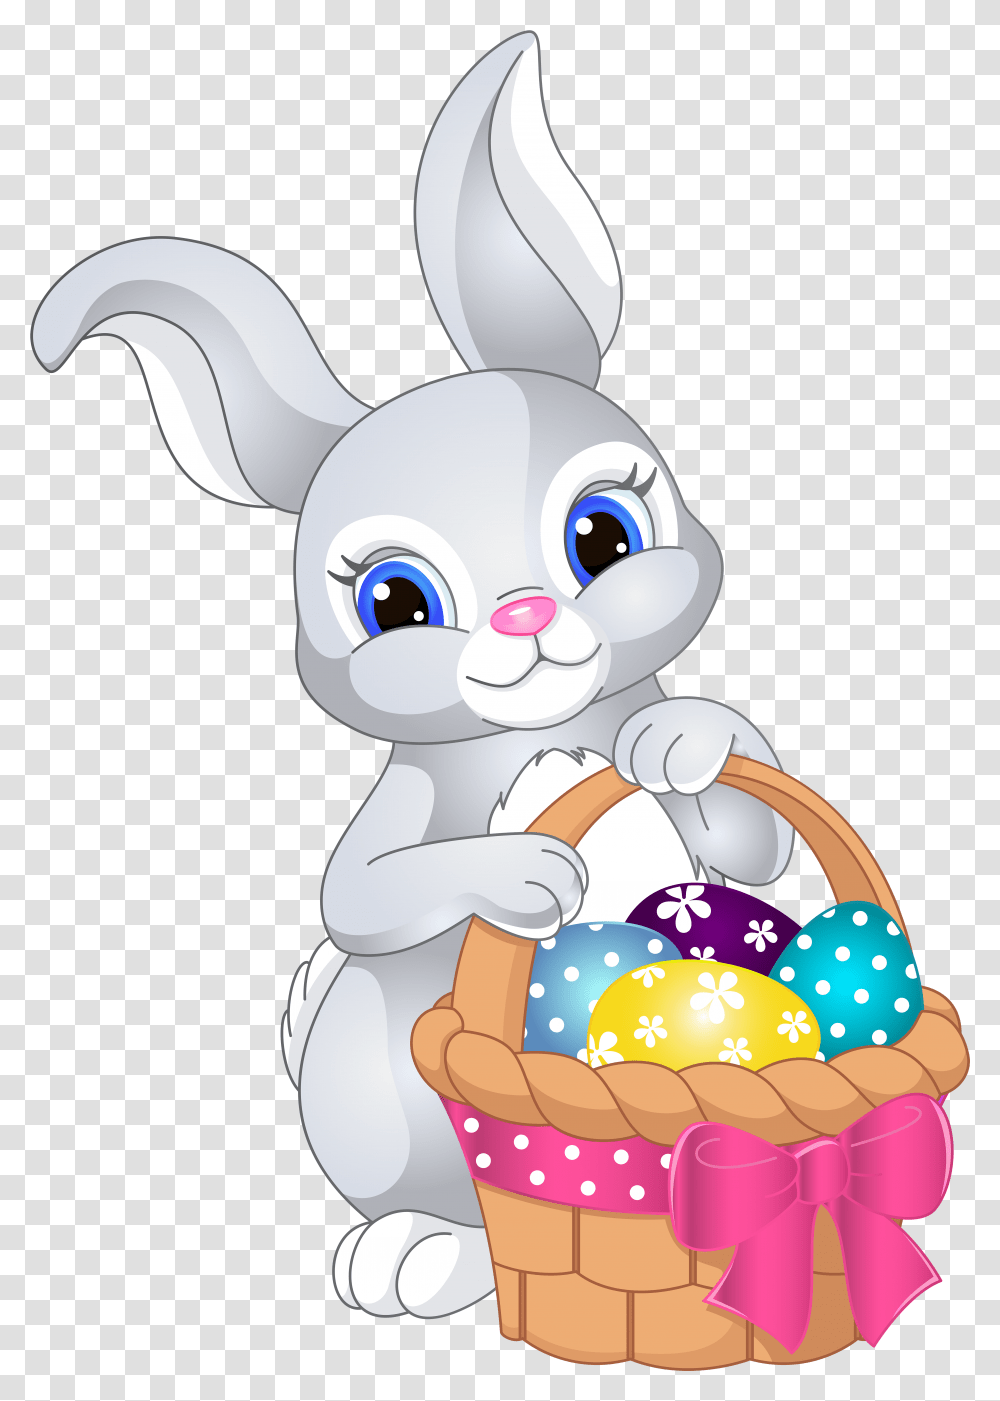 Easter Bunny With Egg Basket Clip Art Image Cute Cartoon Easter Bunny, Food, Toy, Easter Egg Transparent Png